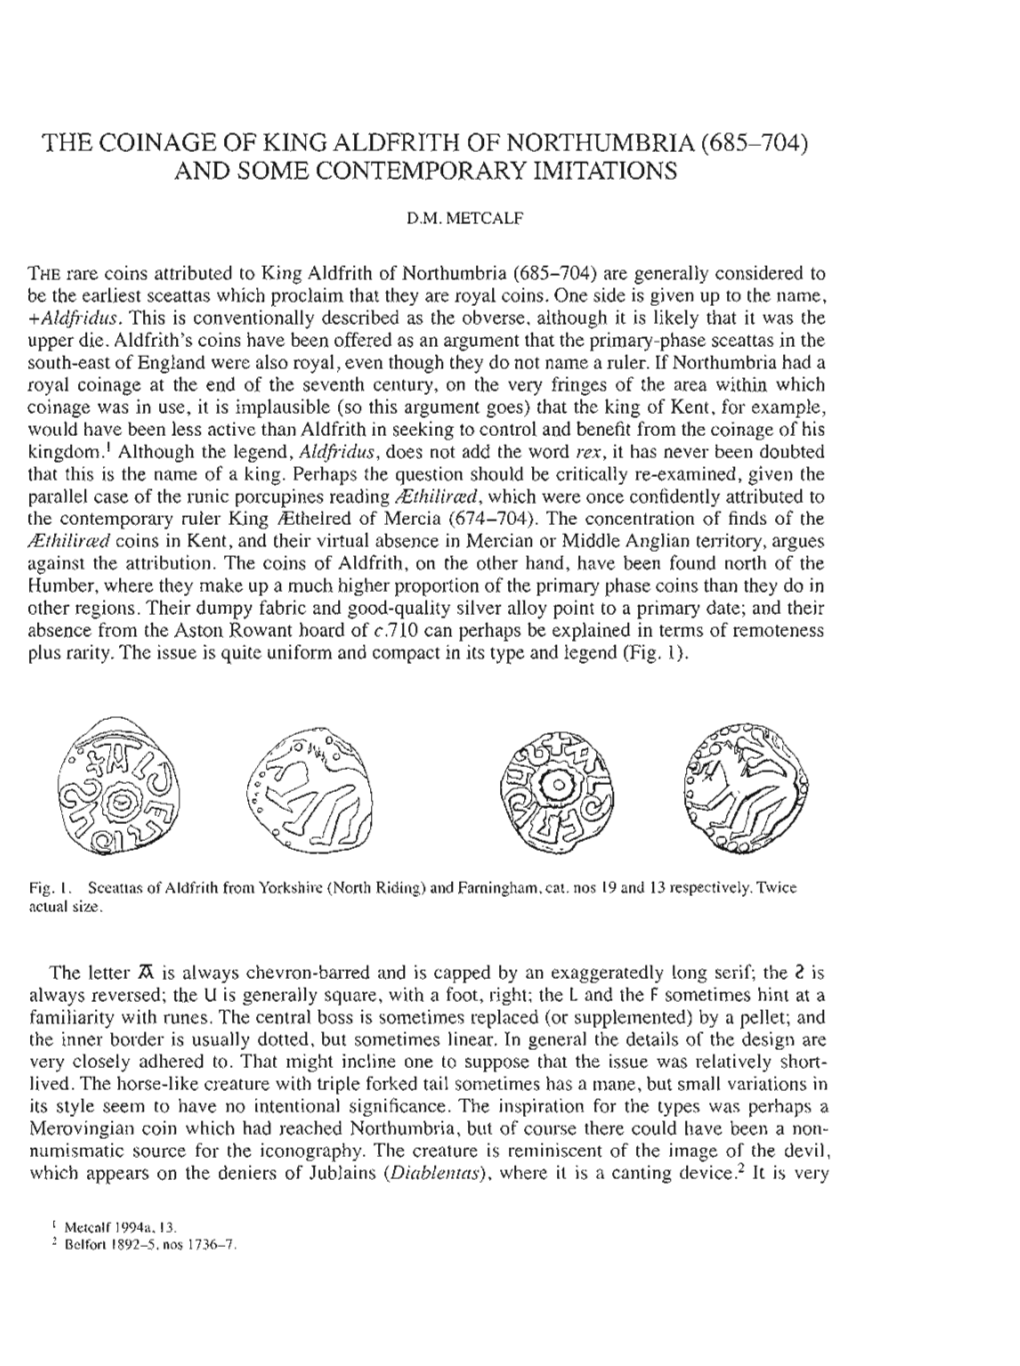 The Coinage of King Aldfrith of Northumbria (685-704) and Some Contemporary Imitations D.M